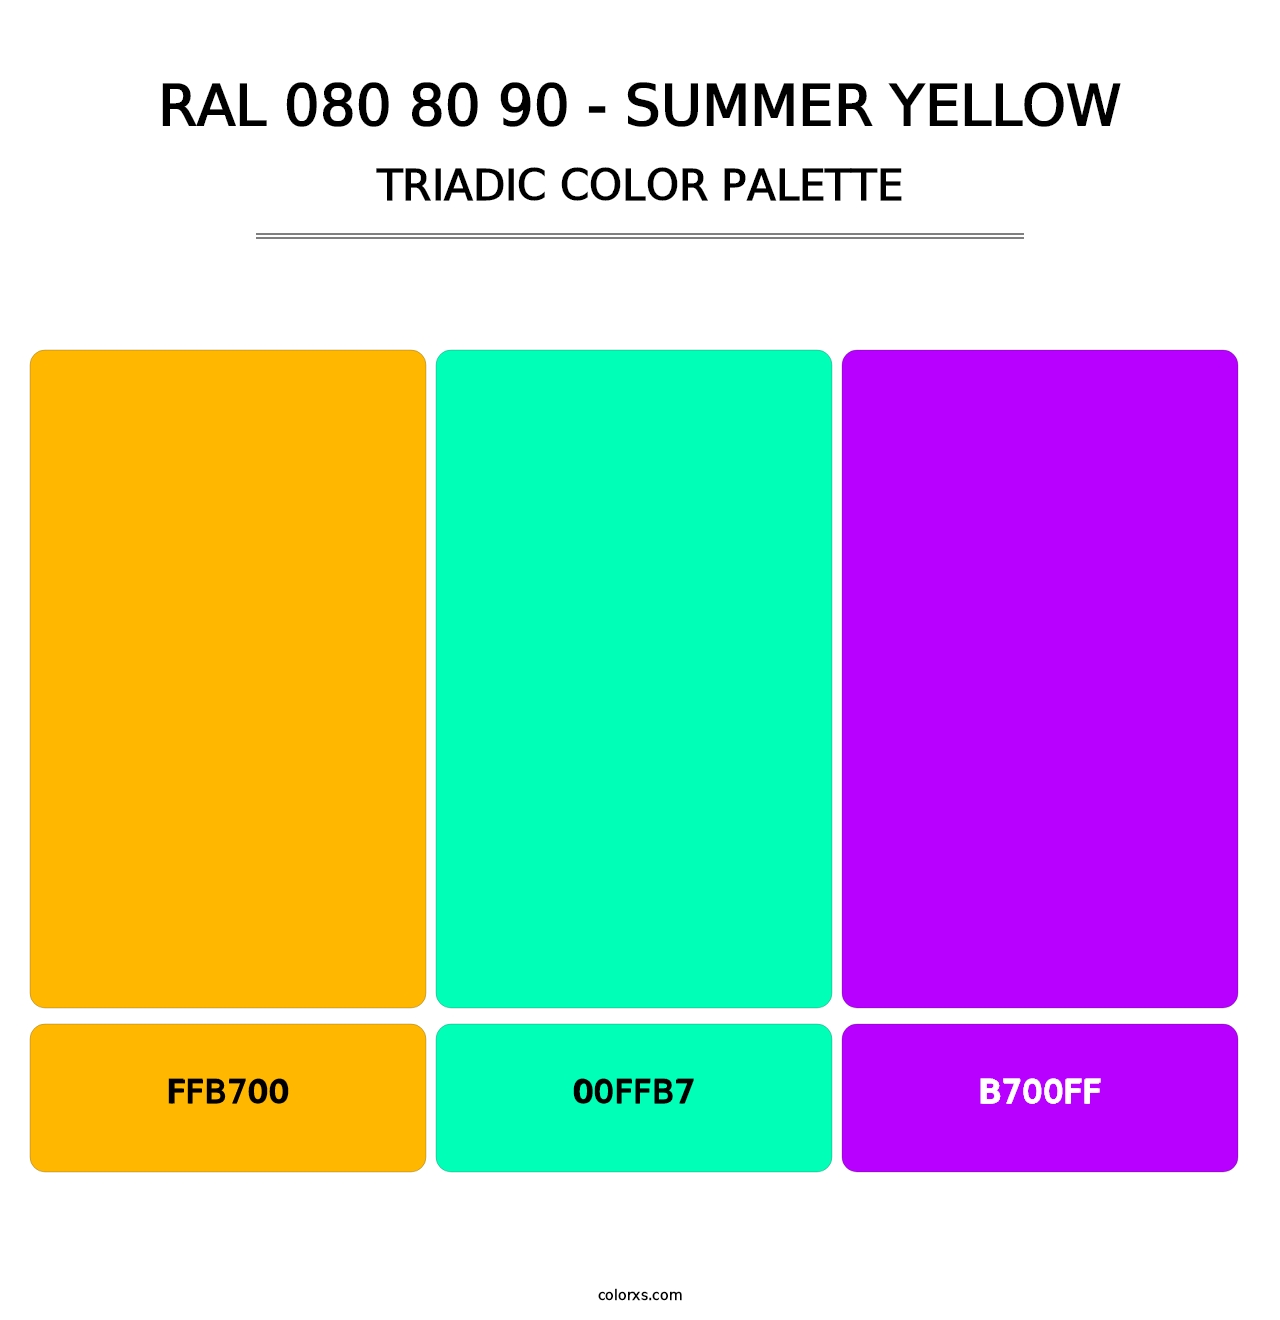 RAL 080 80 90 - Summer Yellow - Triadic Color Palette